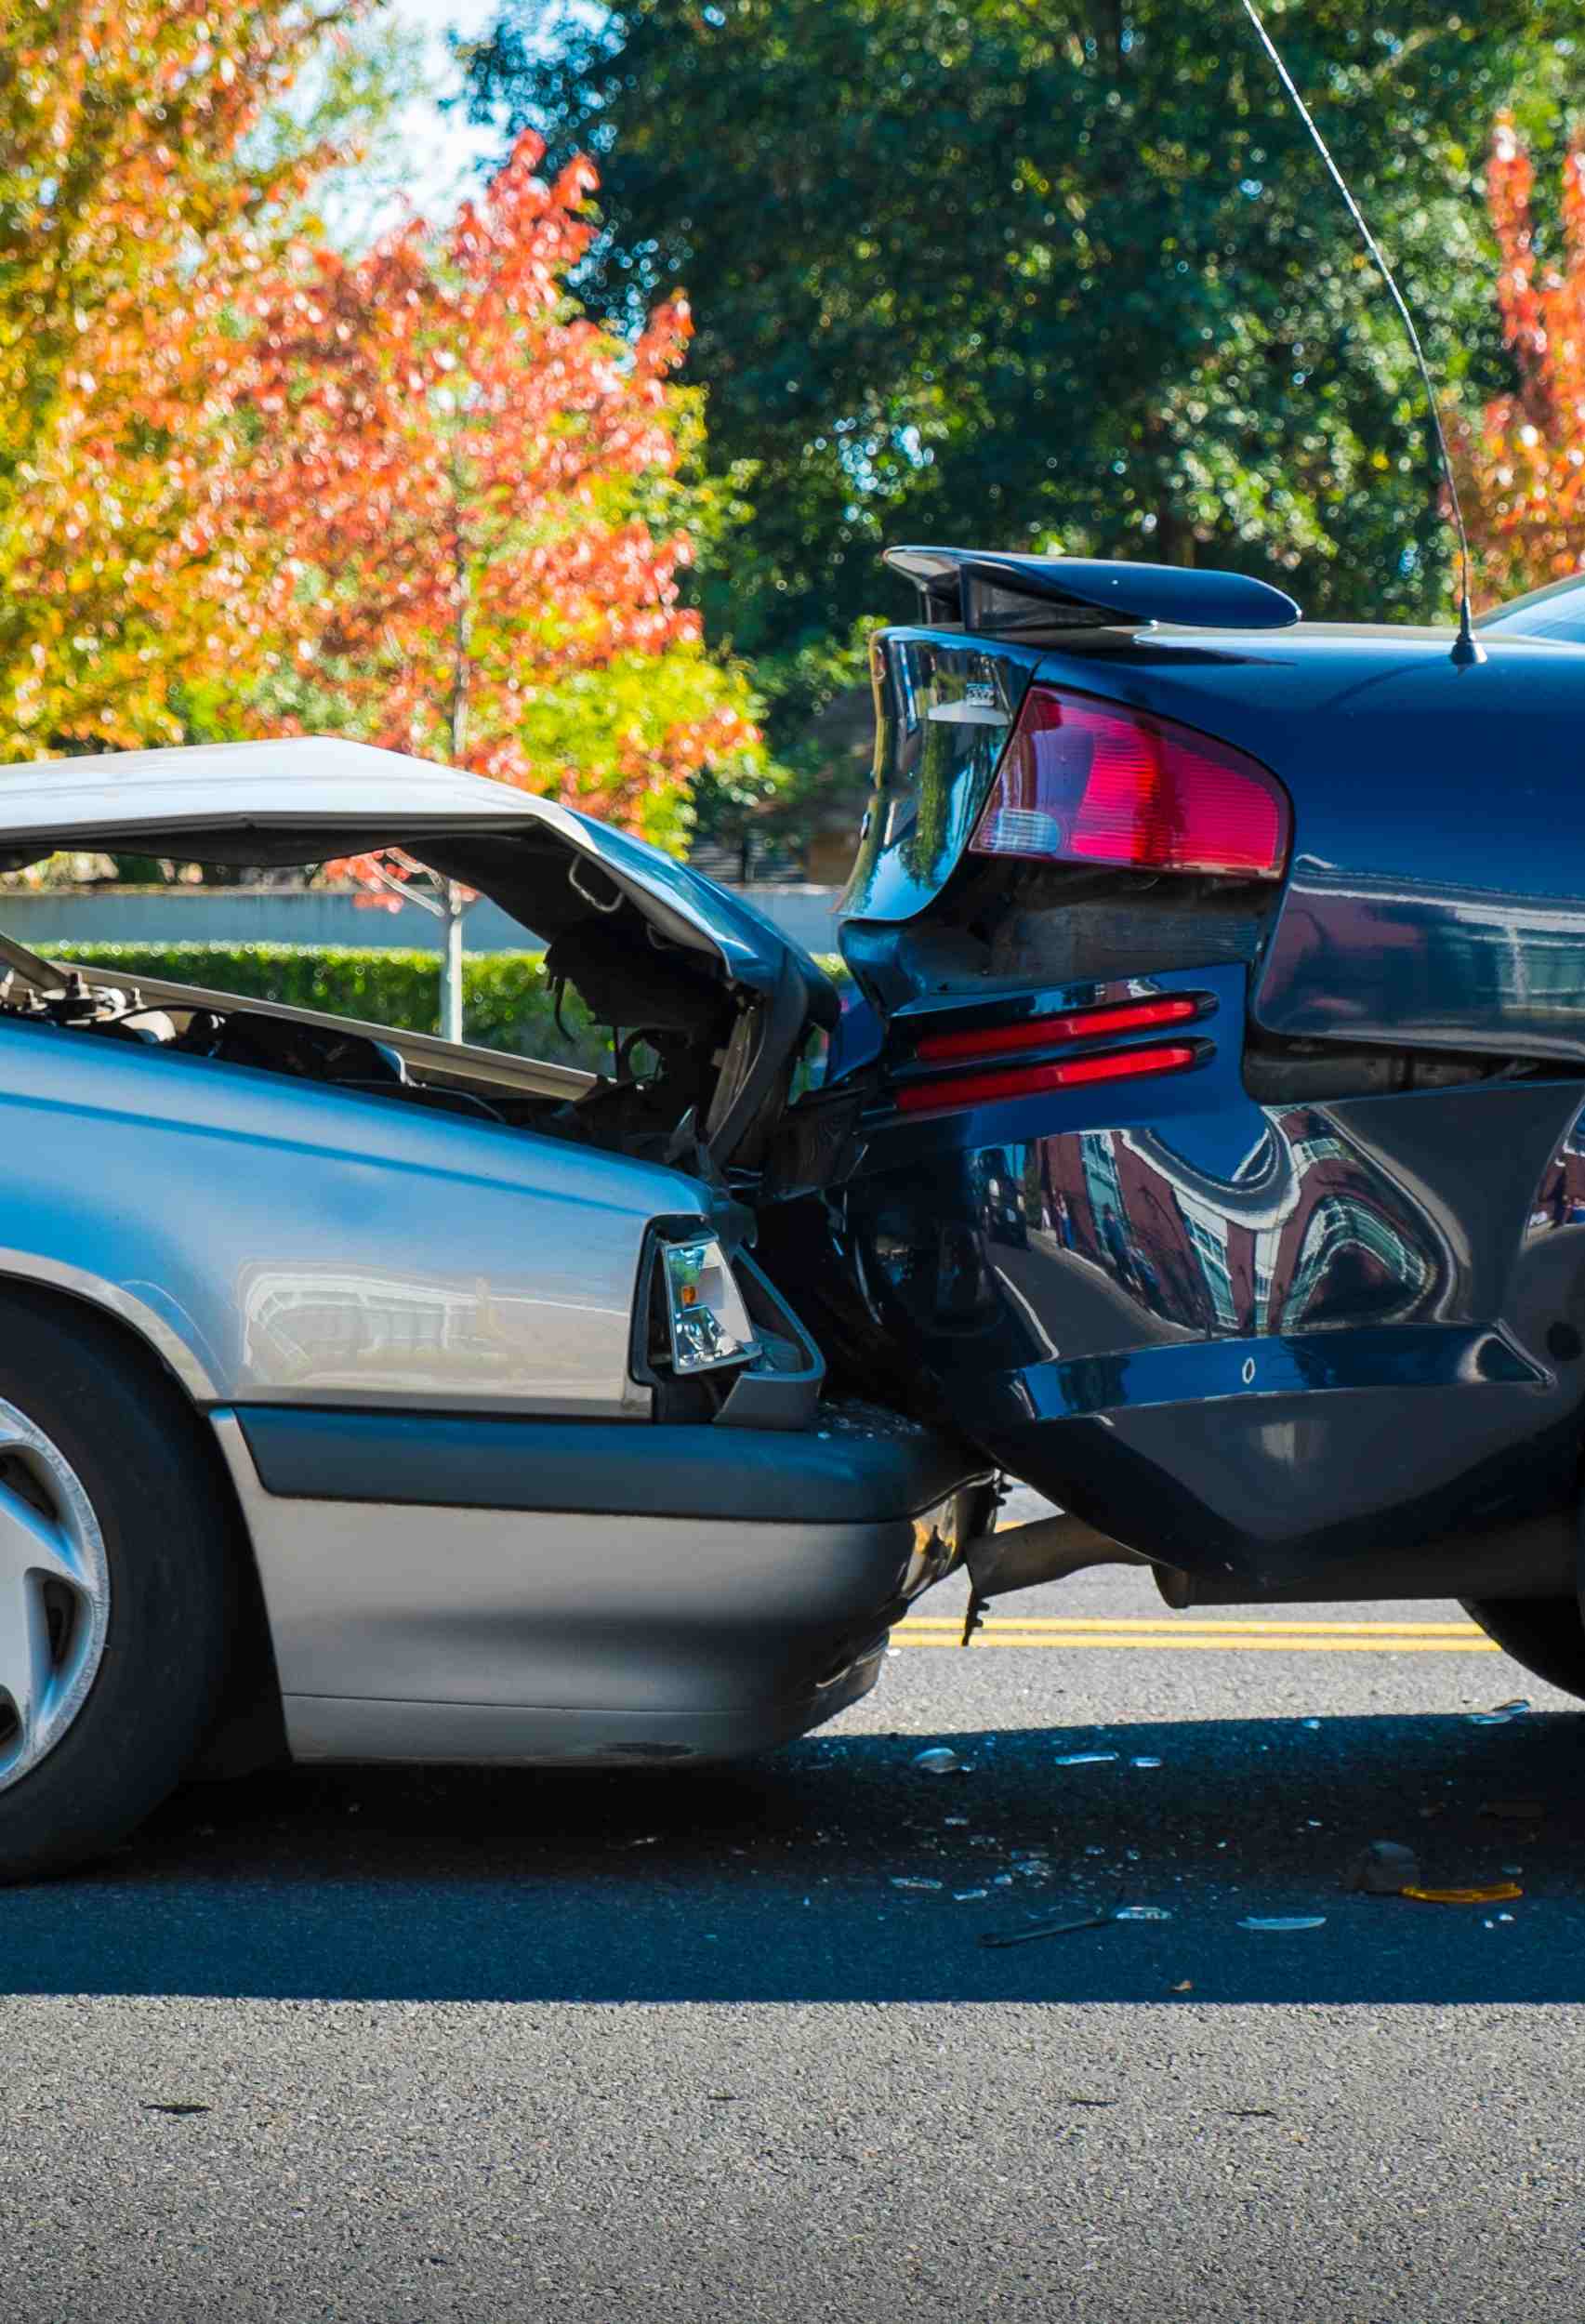 5 Important Questions to Ask a Car Accident Lawyer Before Hiring Them